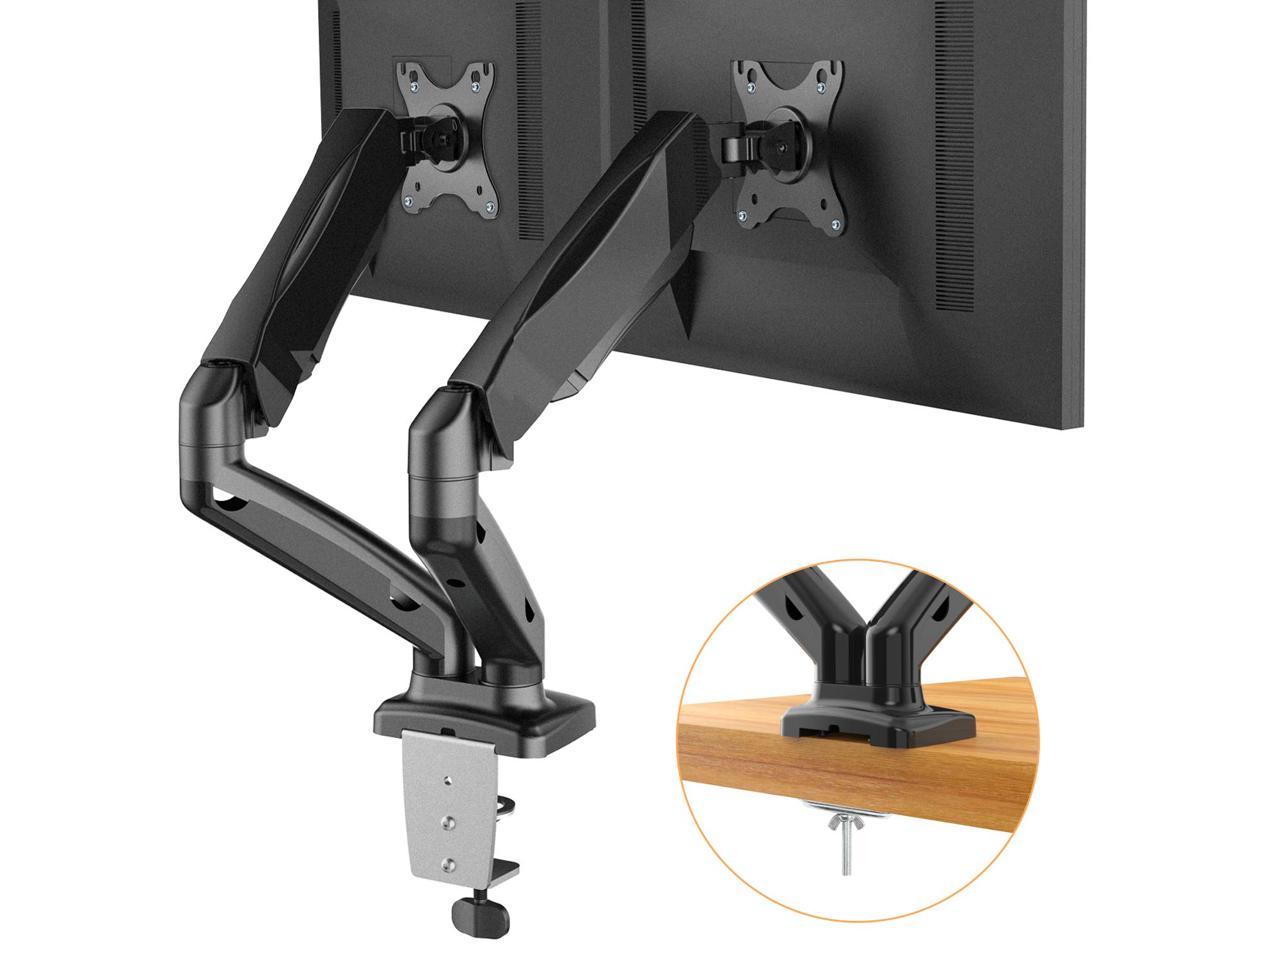 HUANUO Dual Monitor Stand - Ergonomic Adjustable Arm for 13-32 Inch  Monitors, Tilt, Swivel, and Rotate, Weight Capacity up to 20 lbs, VESA